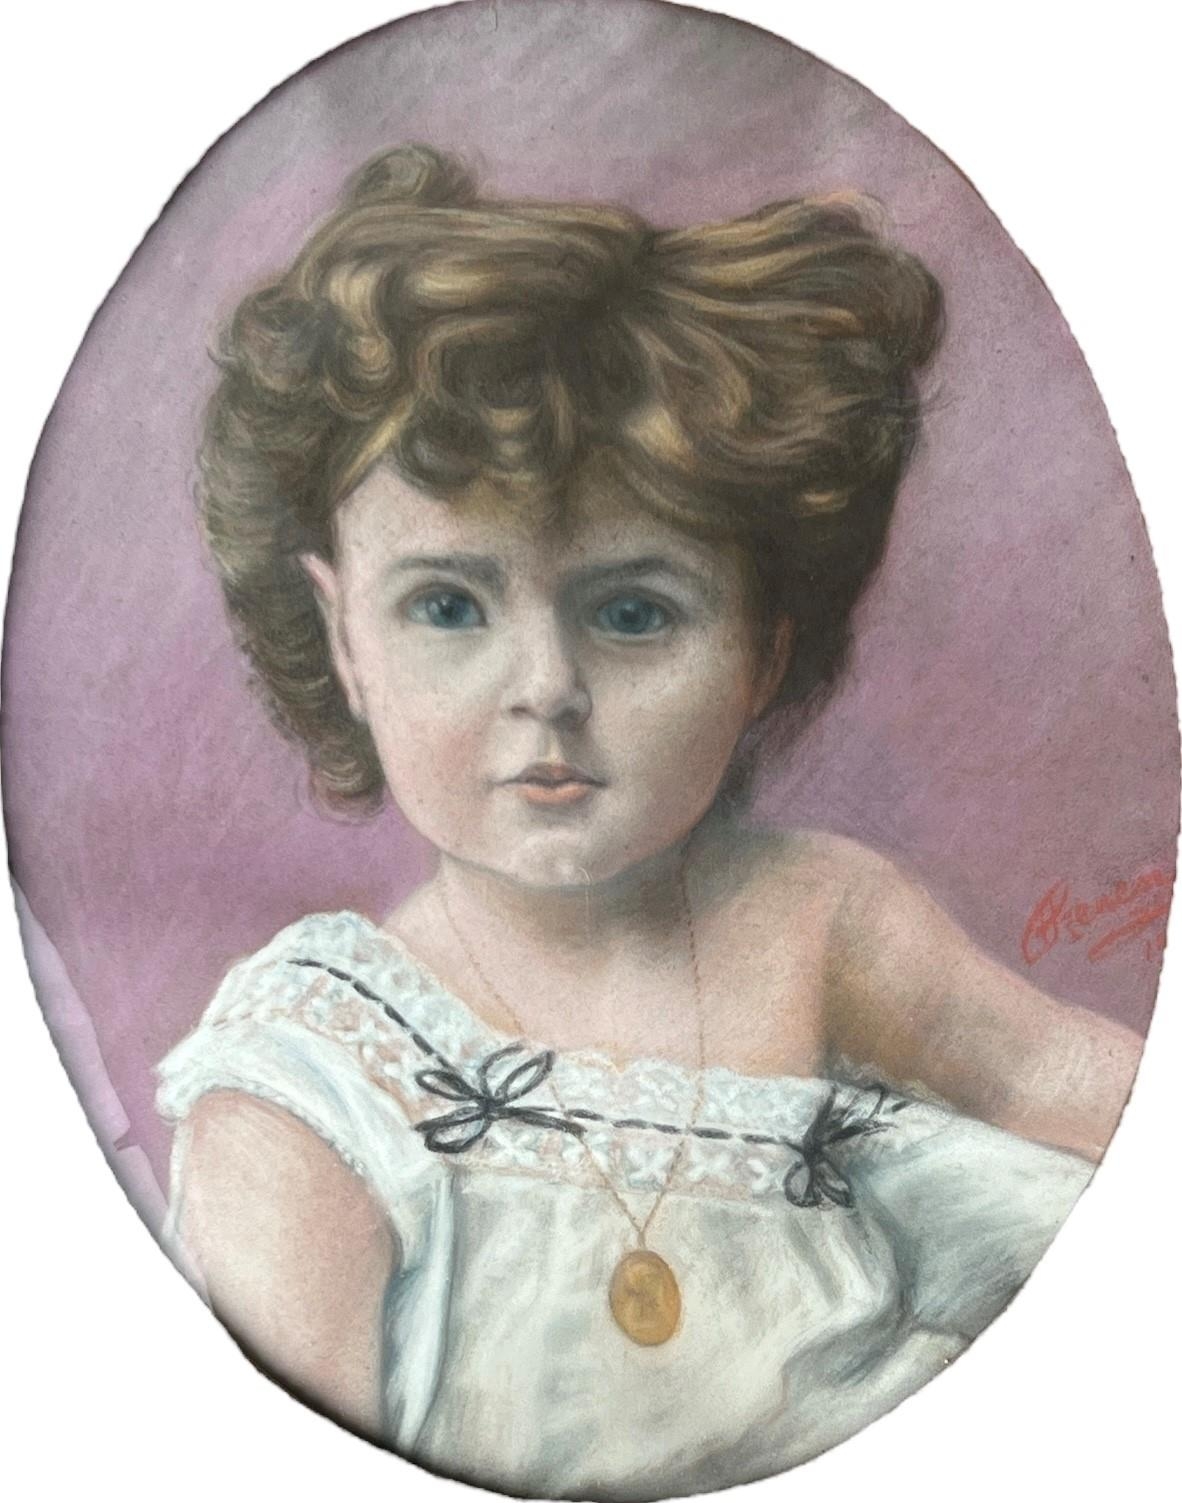 A 20TH CENTURY OVAL PASTEL, PORTRAIT OF A YOUNG GIRL Indistinctly signed lower right, held in a - Image 2 of 3